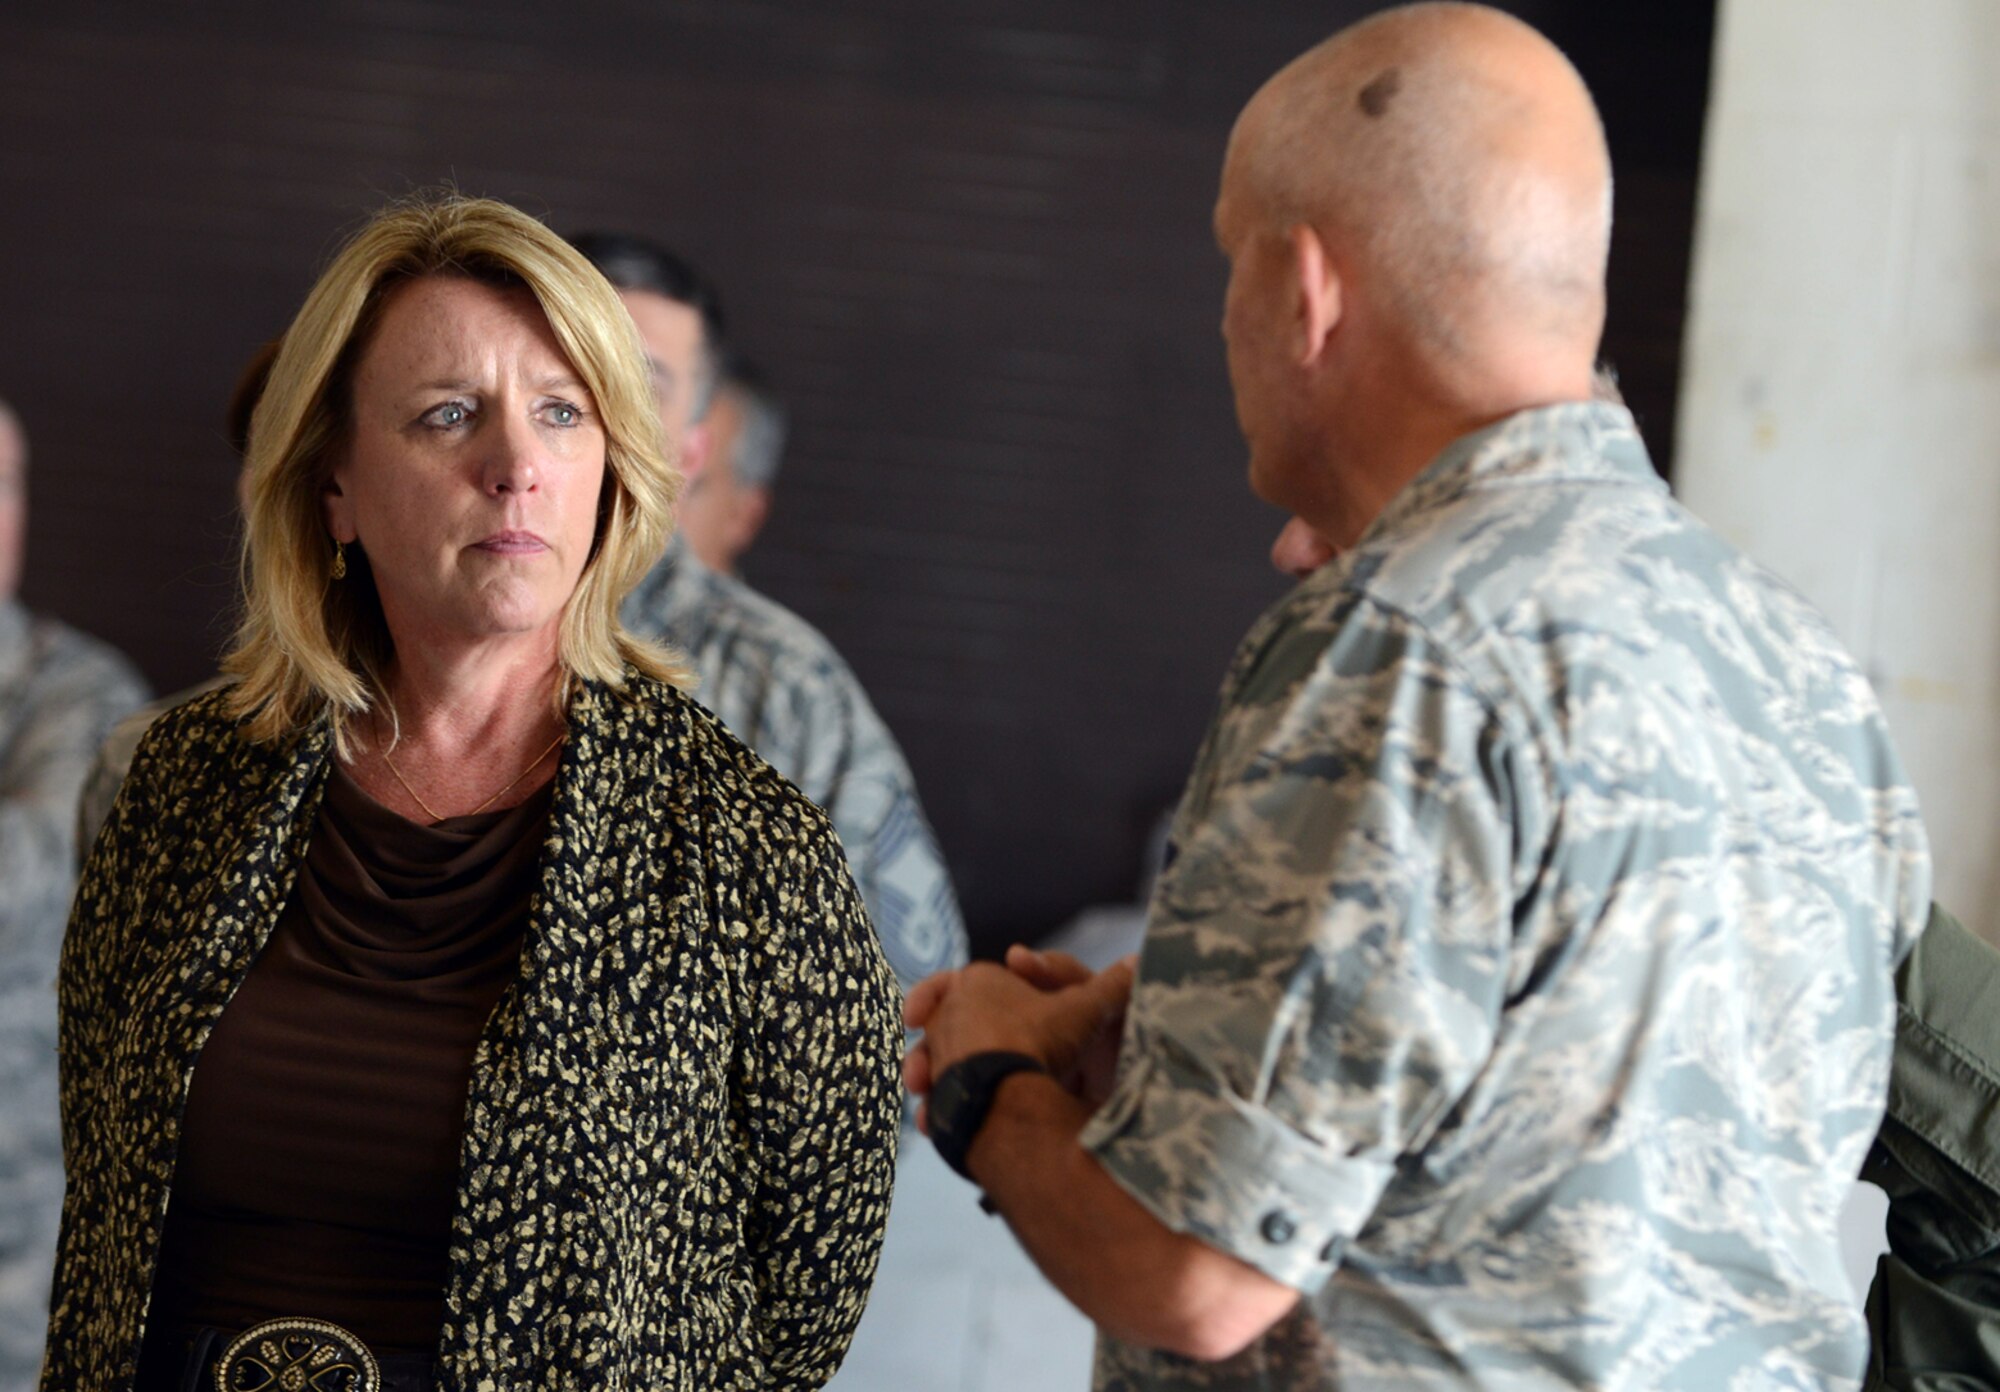 Secretary of the Air Force Deborah Lee James receives a briefing from Col. Kelly Scott, 461st Maintenance Group commander, during a tour of the 461st and 116th Air Control wings at Robins Air Force Base, Ga. Aug. 21, 2014. During her tour of Robins Air Force Base, James also visited Air Force Reserve Command, the 78th Air Base Wing and the Warner Robins Air Logistics Complex. (U.S. Air Force photo by Tommie Horton)